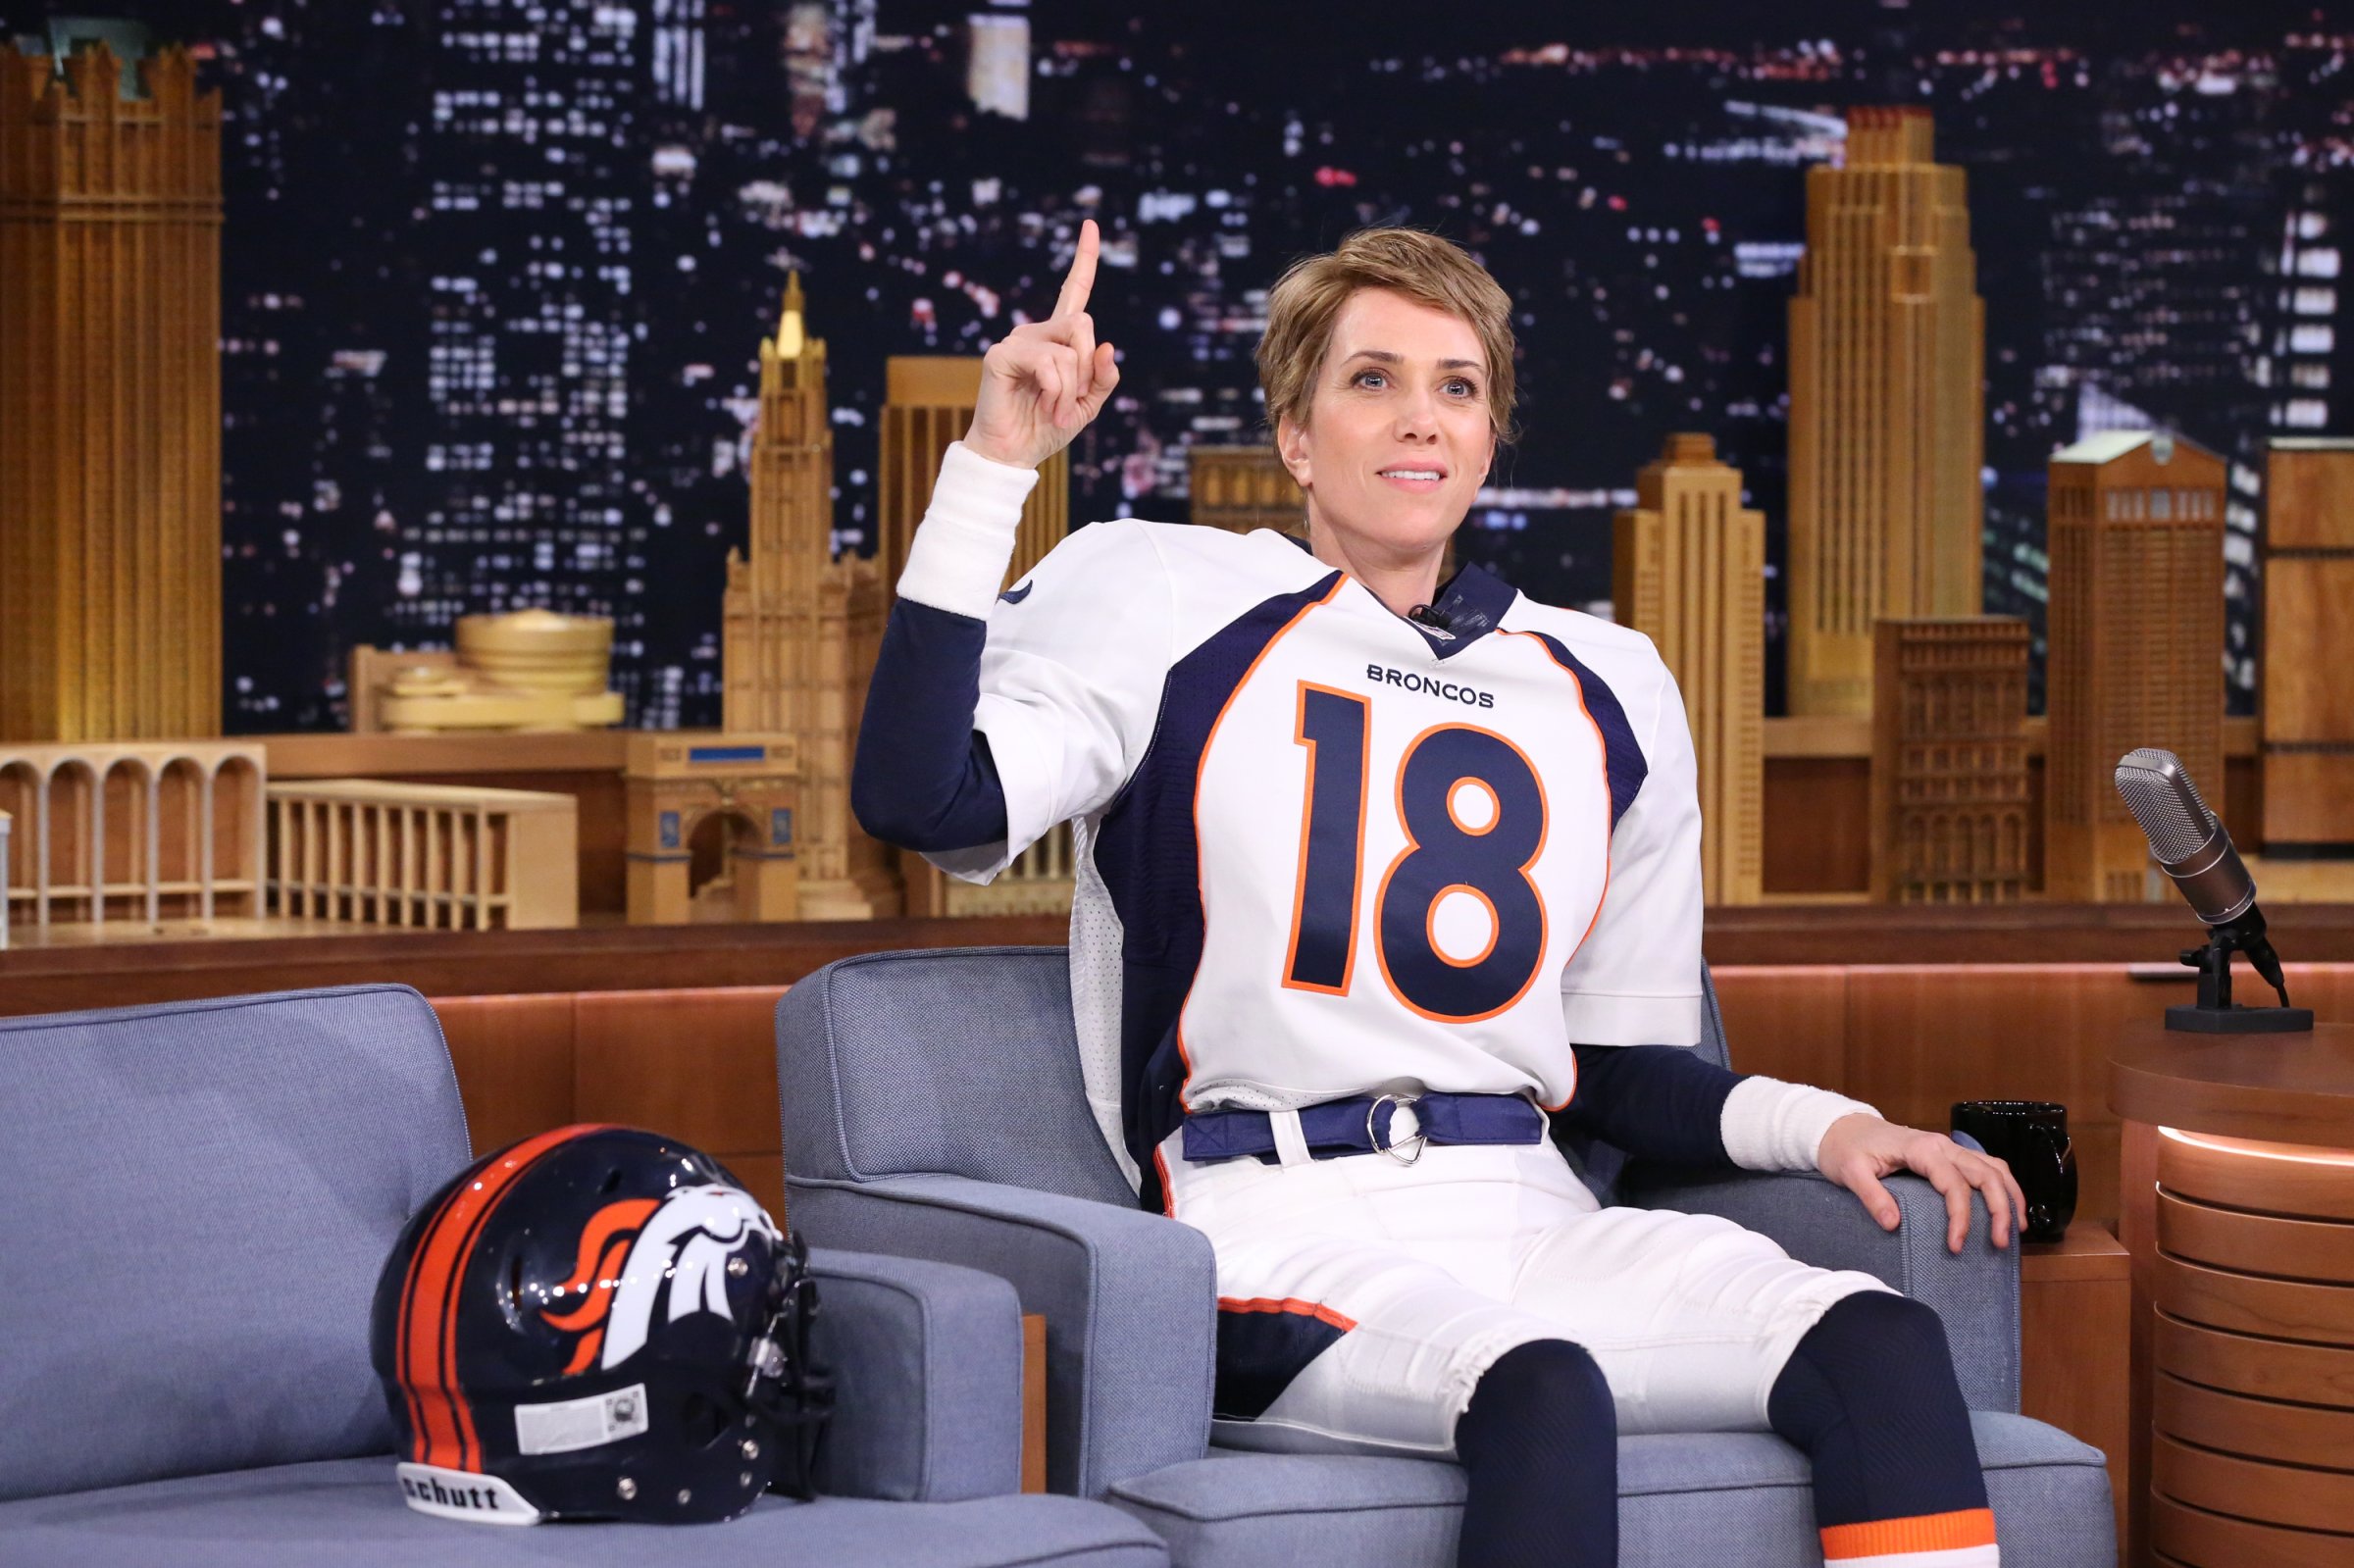 Kristen Wiig dressed as Denver Bronco's quarterback Peyton Manning on 'The Tonight Show' with Jimmy Fallon on Feb. 11, 2016.